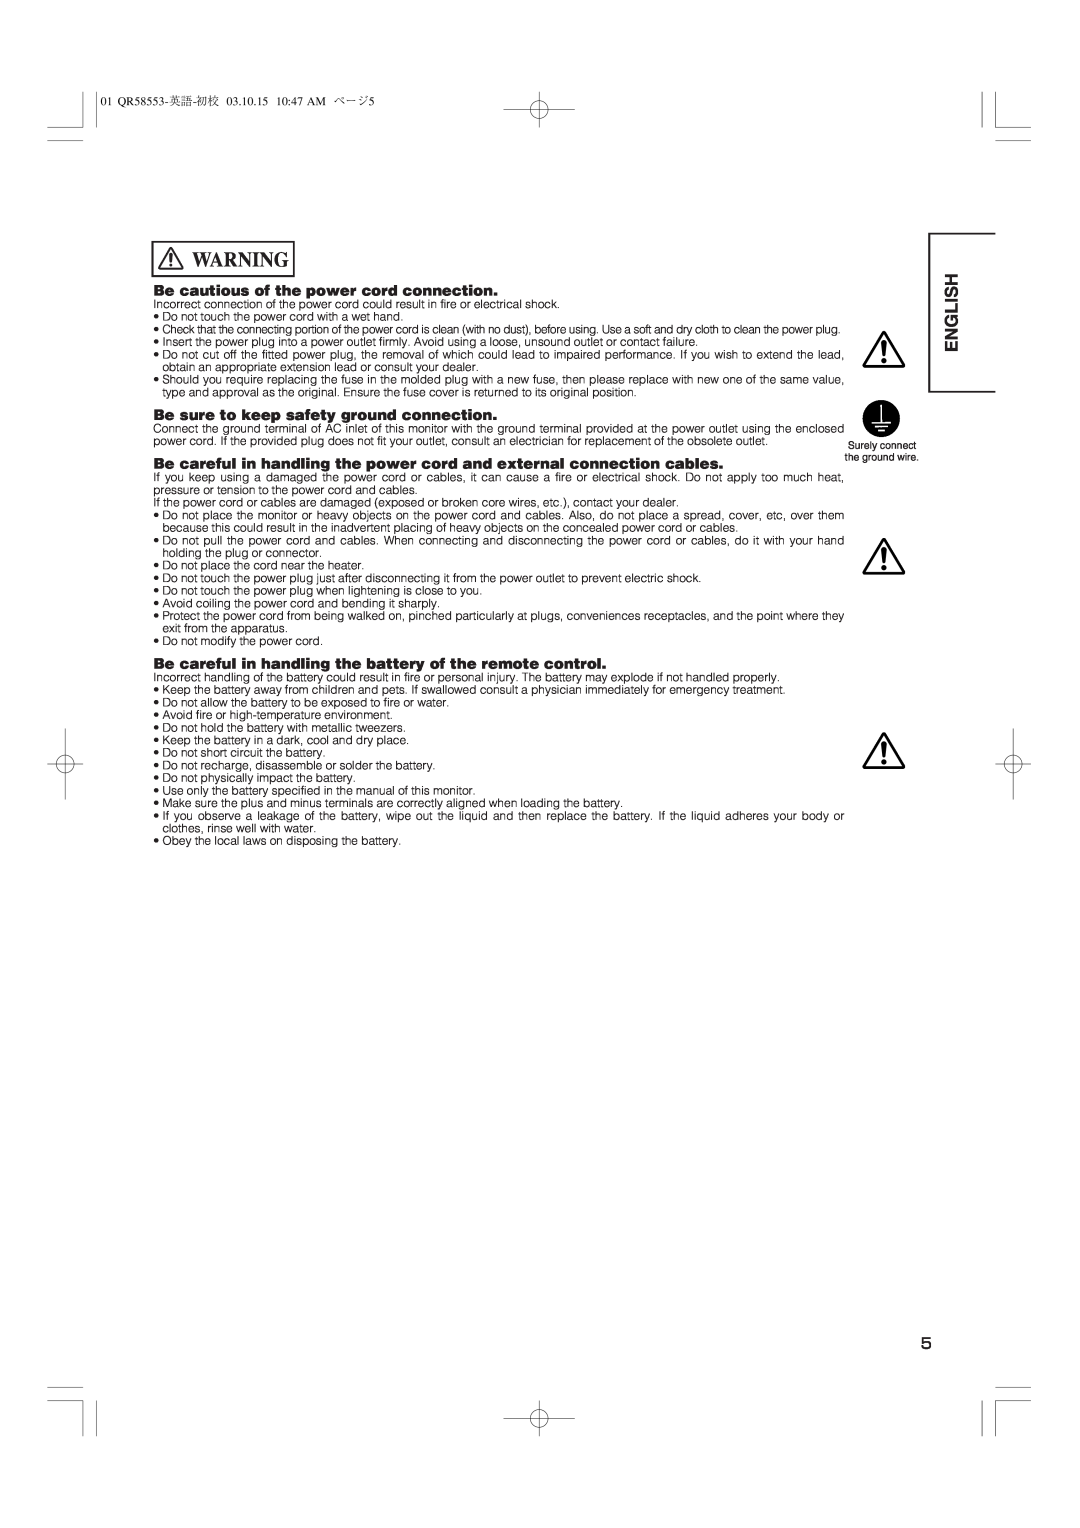 Hitachi 42PD5000 user manual English, Be cautious of the power cord connection, Be sure to keep safety ground connection 